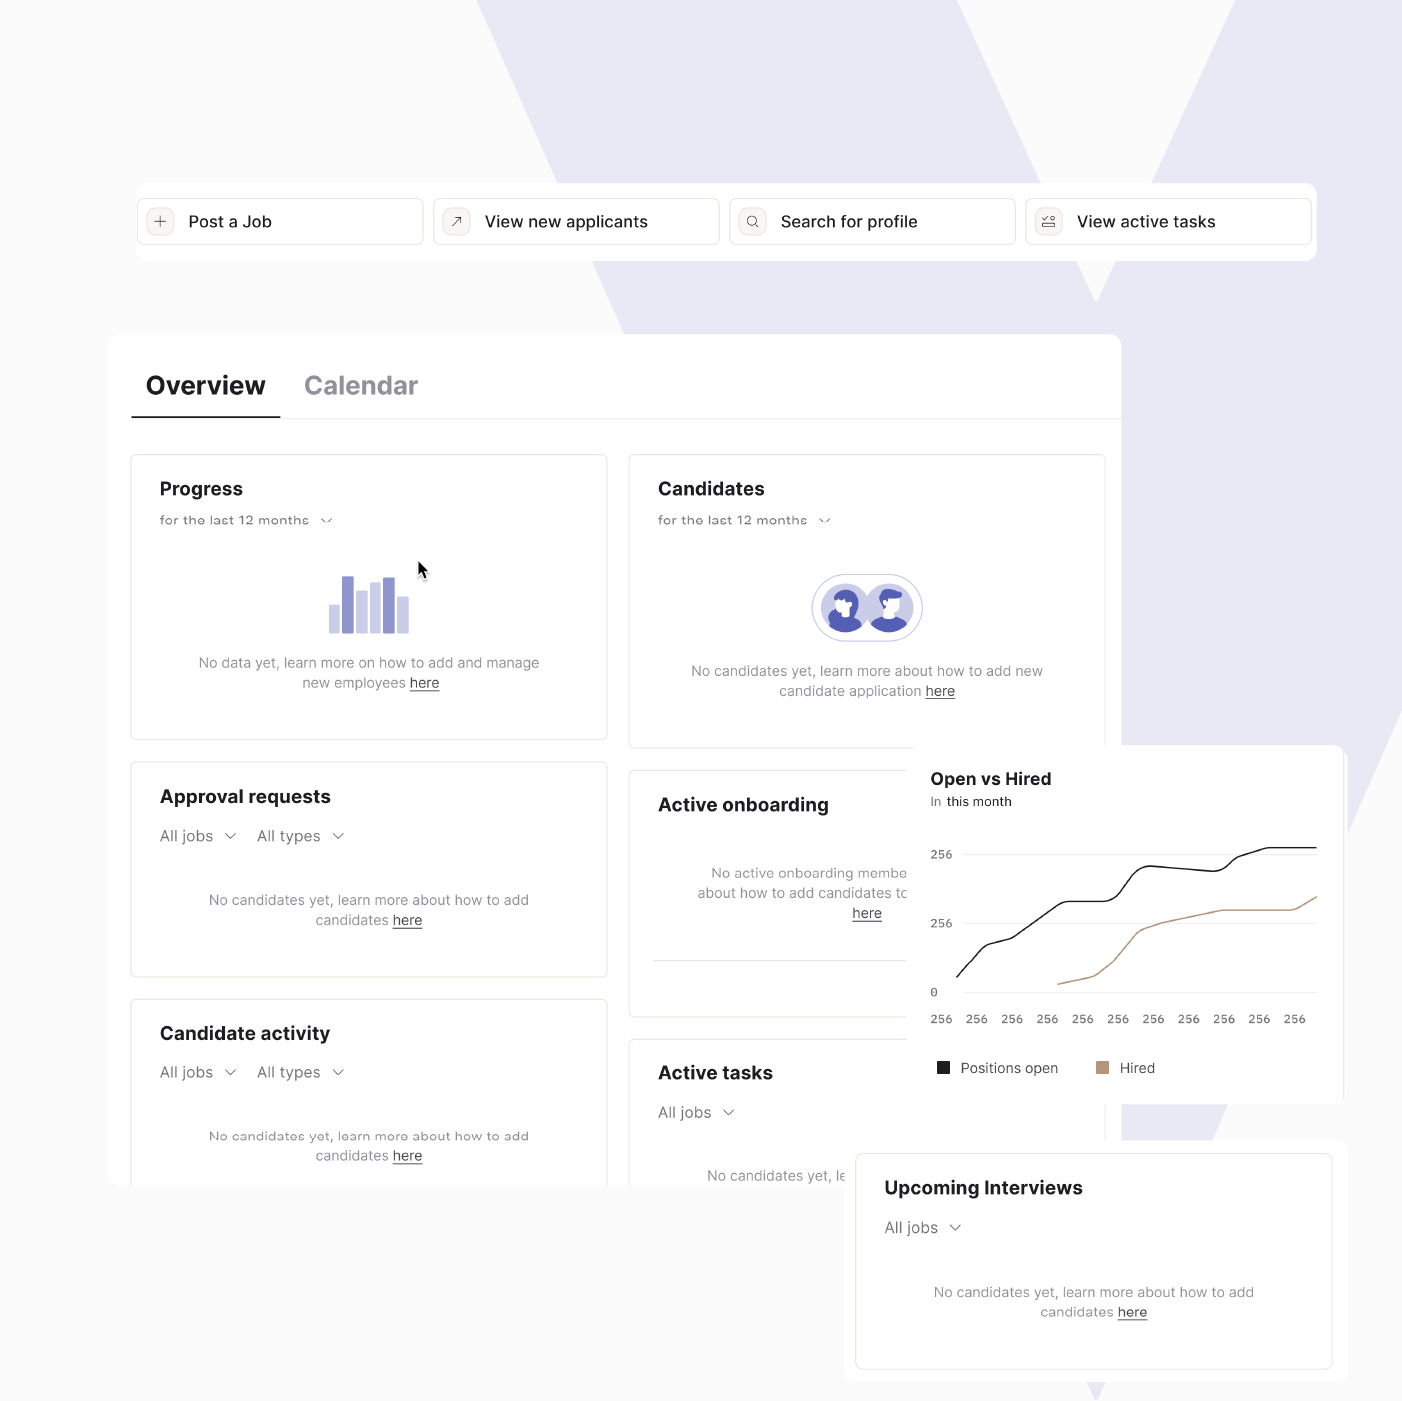 Get analytical reports that meet your hiring needs. Share progress with teammates and find places for improvement in your hiring process. Track, share, and improve your talent acquisition with real-time recruiting analytics, reports, and insights.